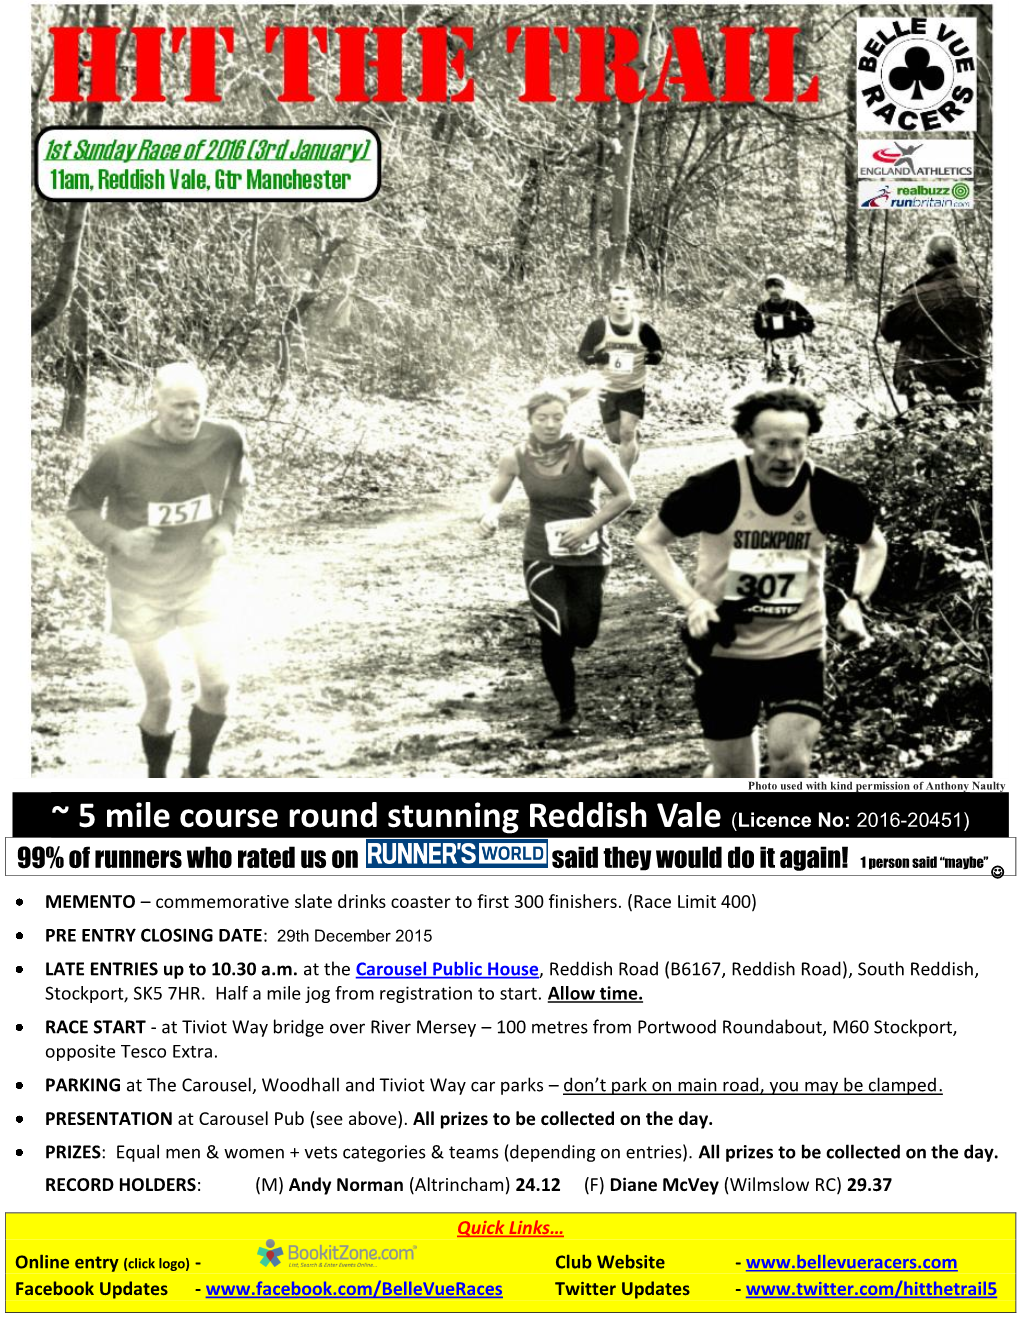 5 Mile Course Round Stunning Reddish Vale (Licence No: 2016-20451)